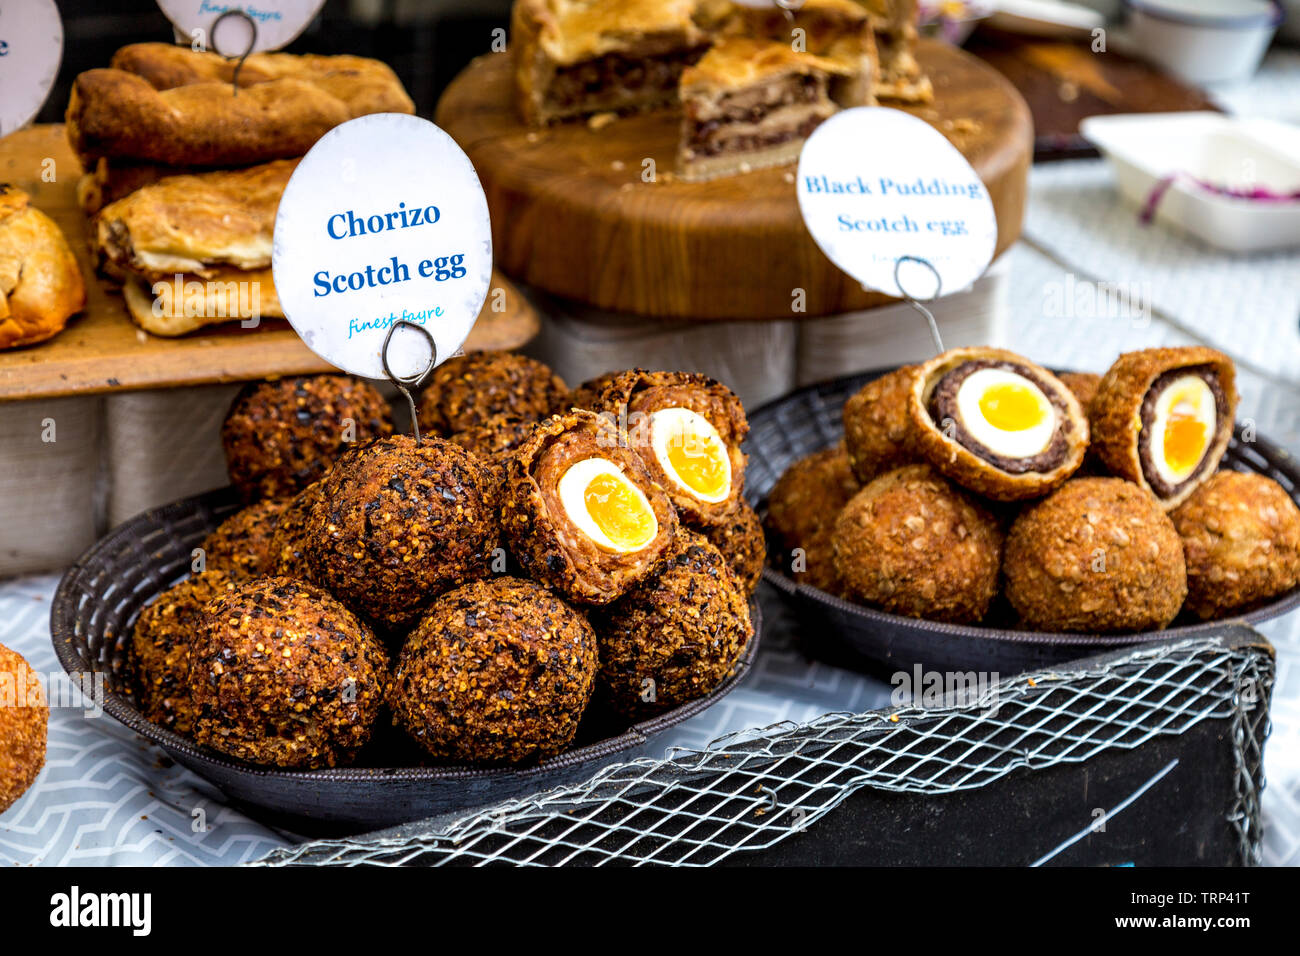 Street food stall with scotch eggs (Finest Fayre Scotch Eggs)  at Maltby Street Market, London, UK Stock Photo